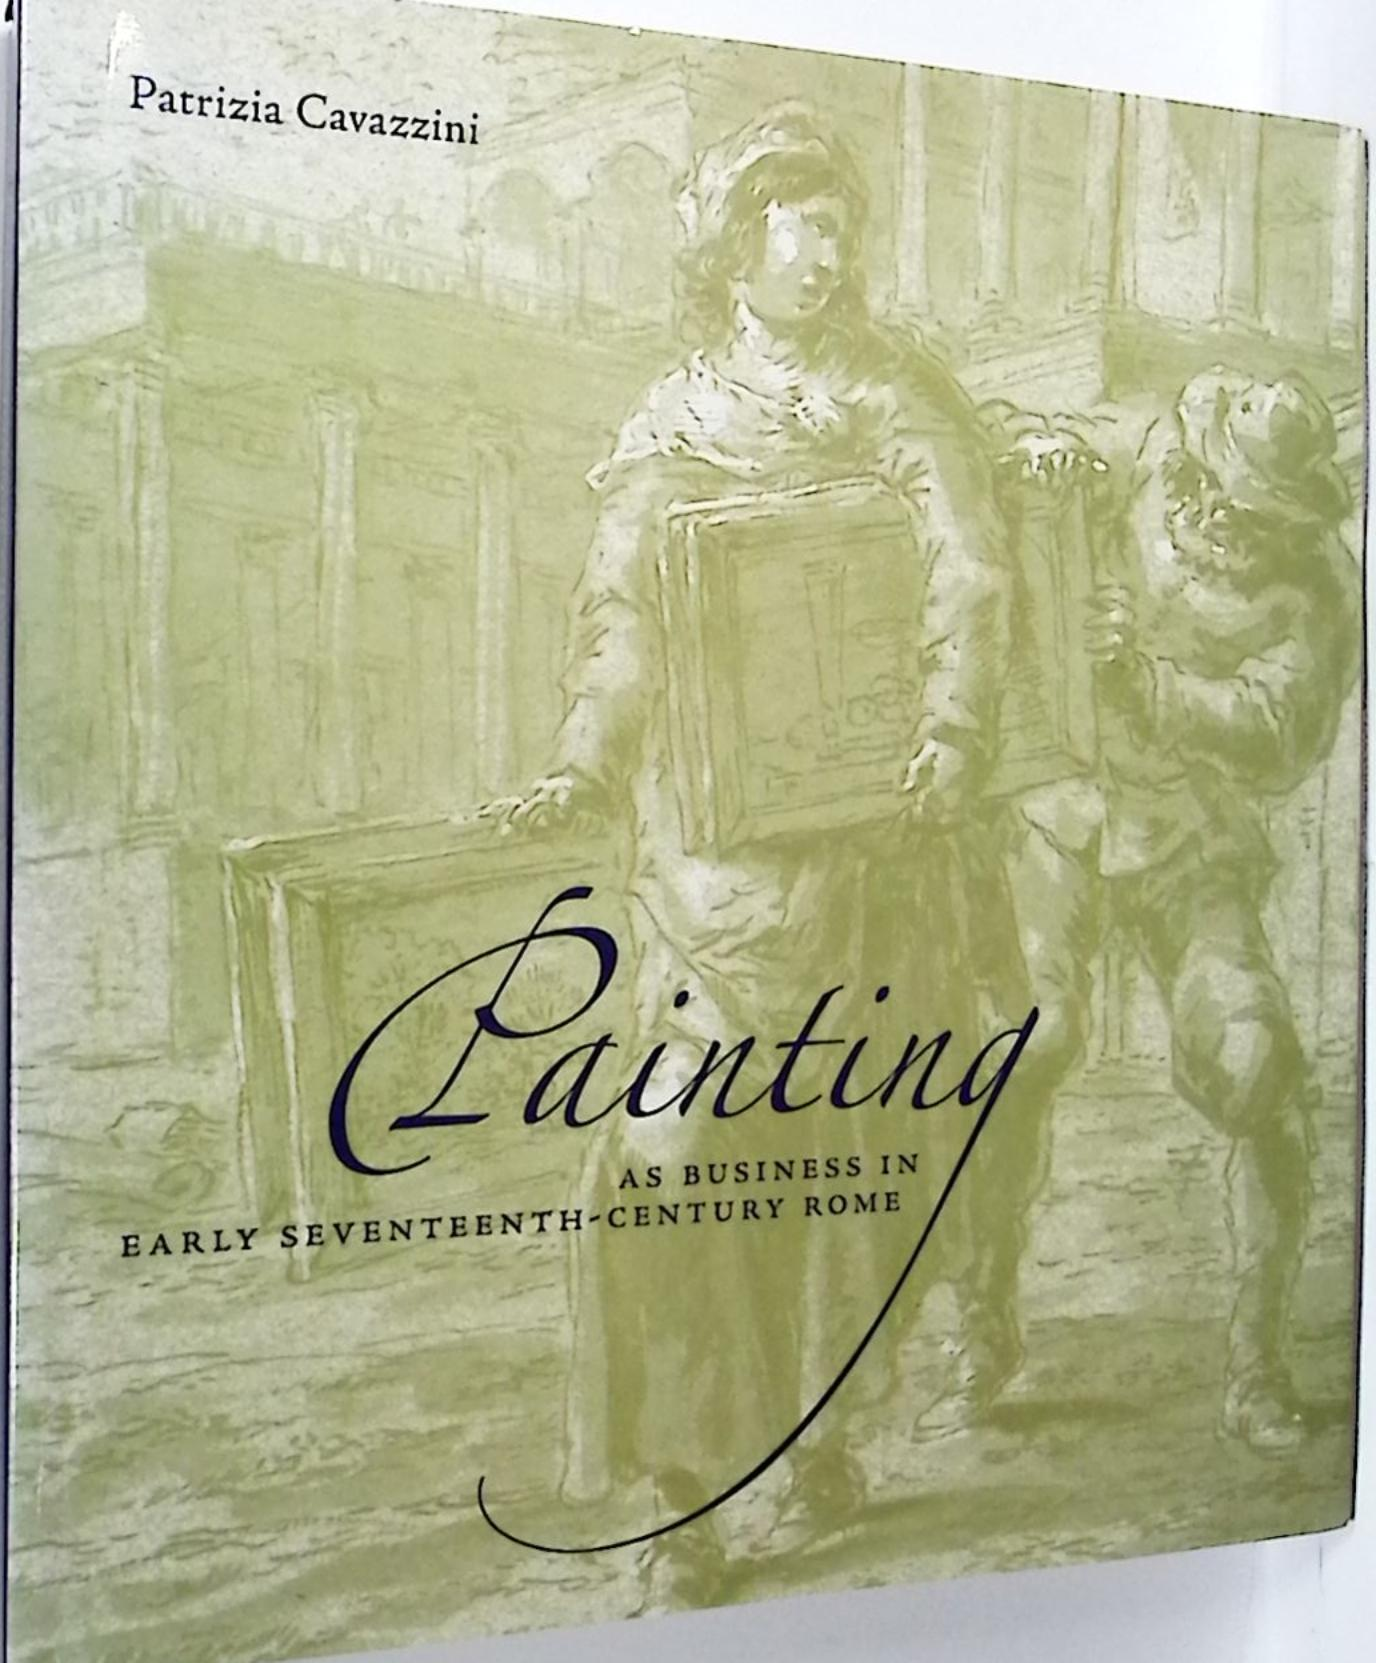 CAVAZZINI, PATRIZIA - Painting As Business in Early Seventeenth-Century Rome